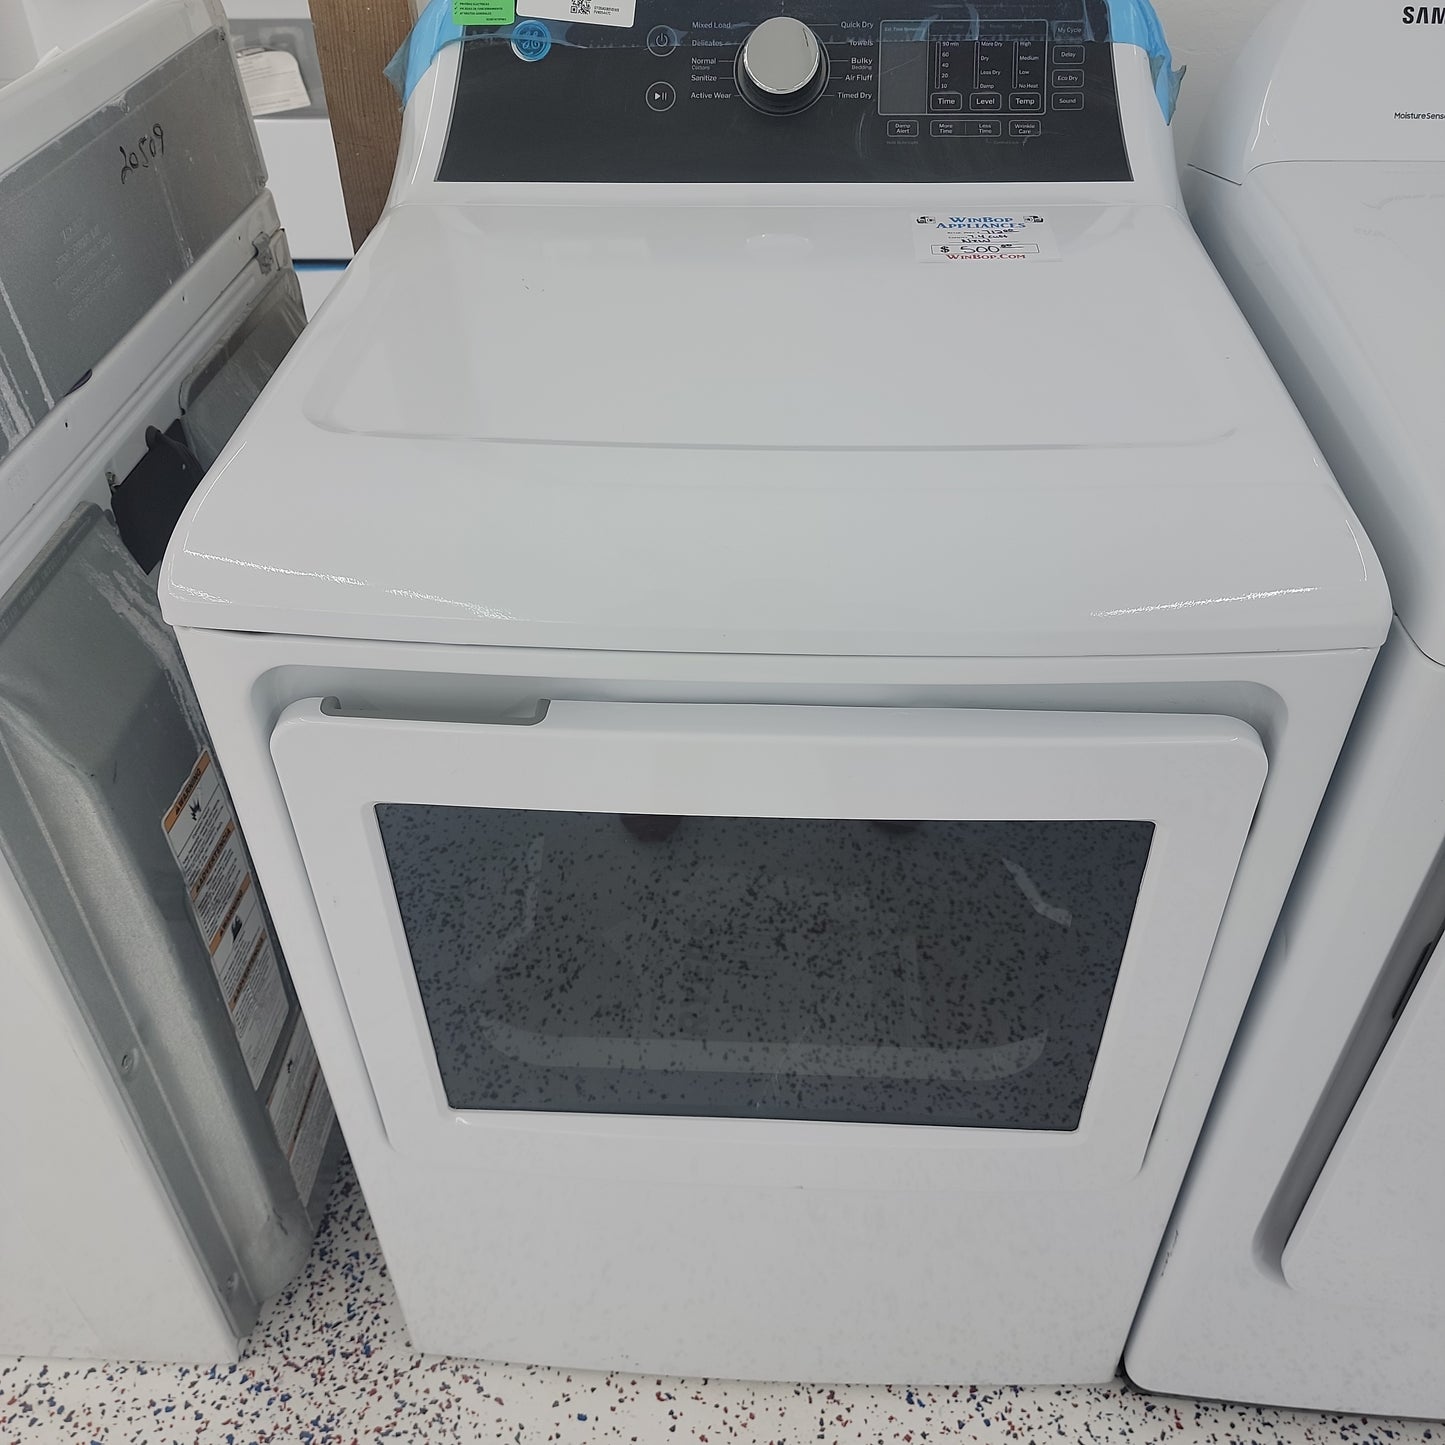 New GE 7.2 cubic ft Gas dryer